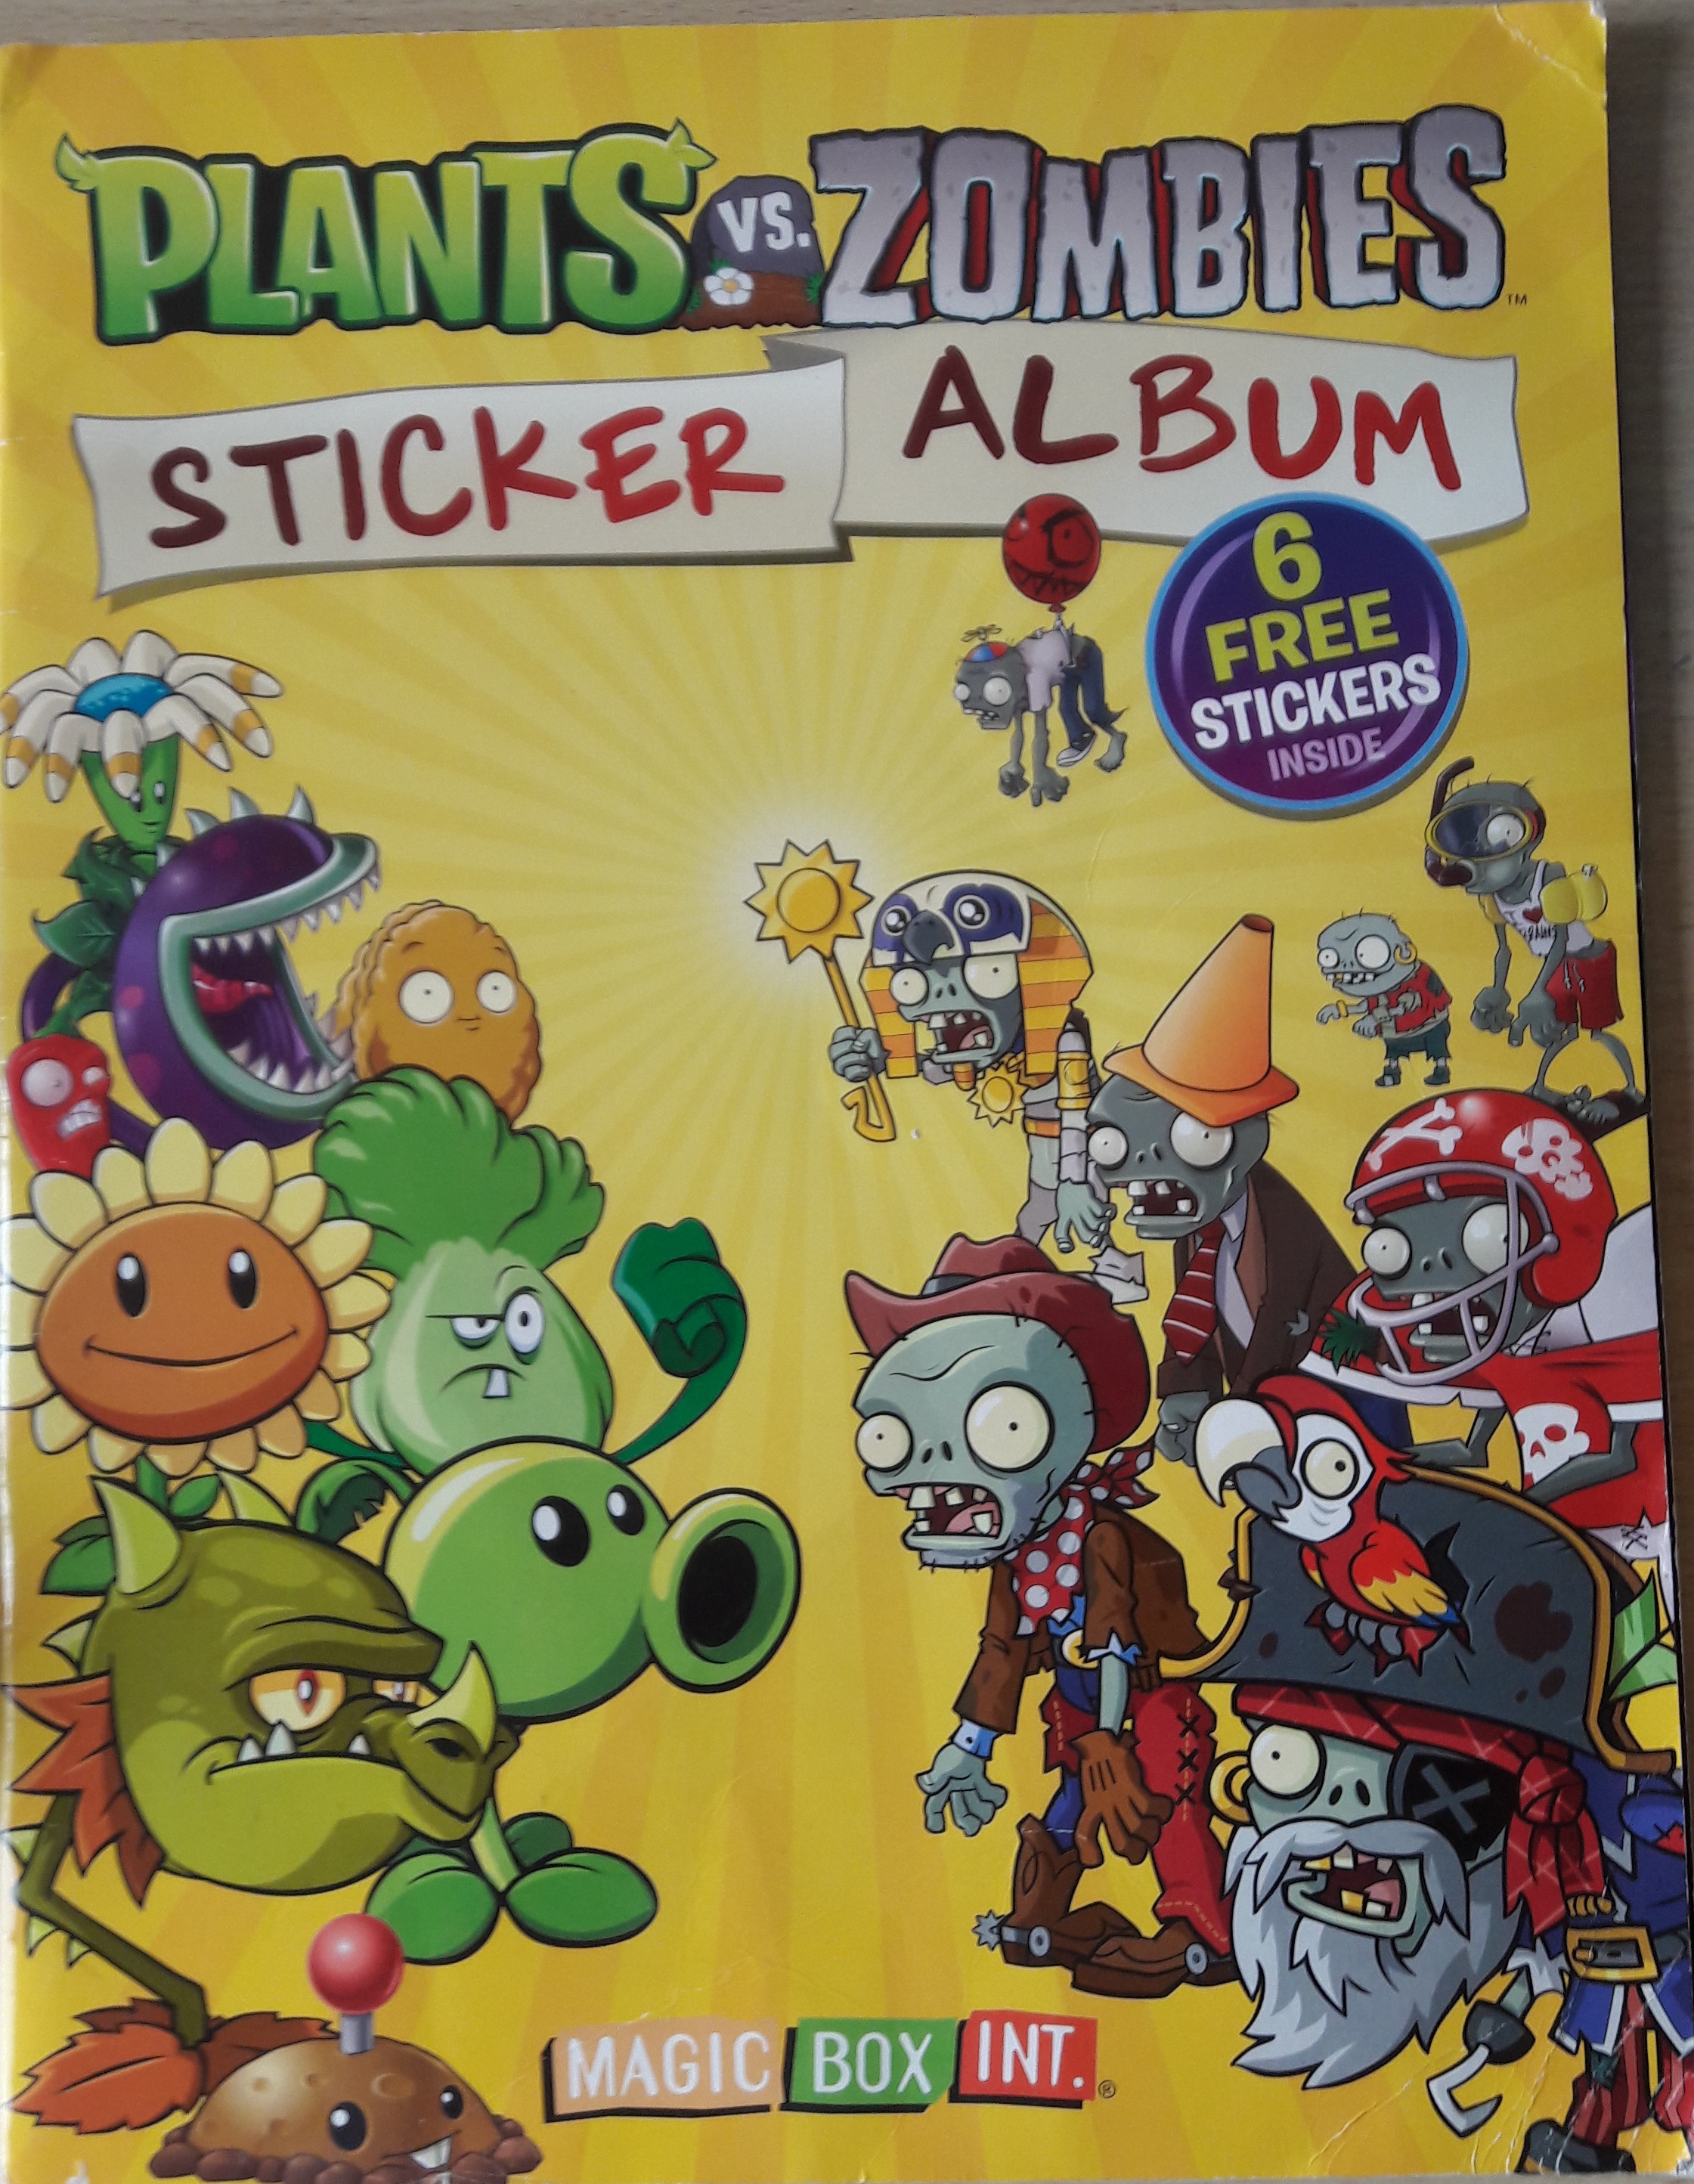 plants zombies 2 which sticker pack